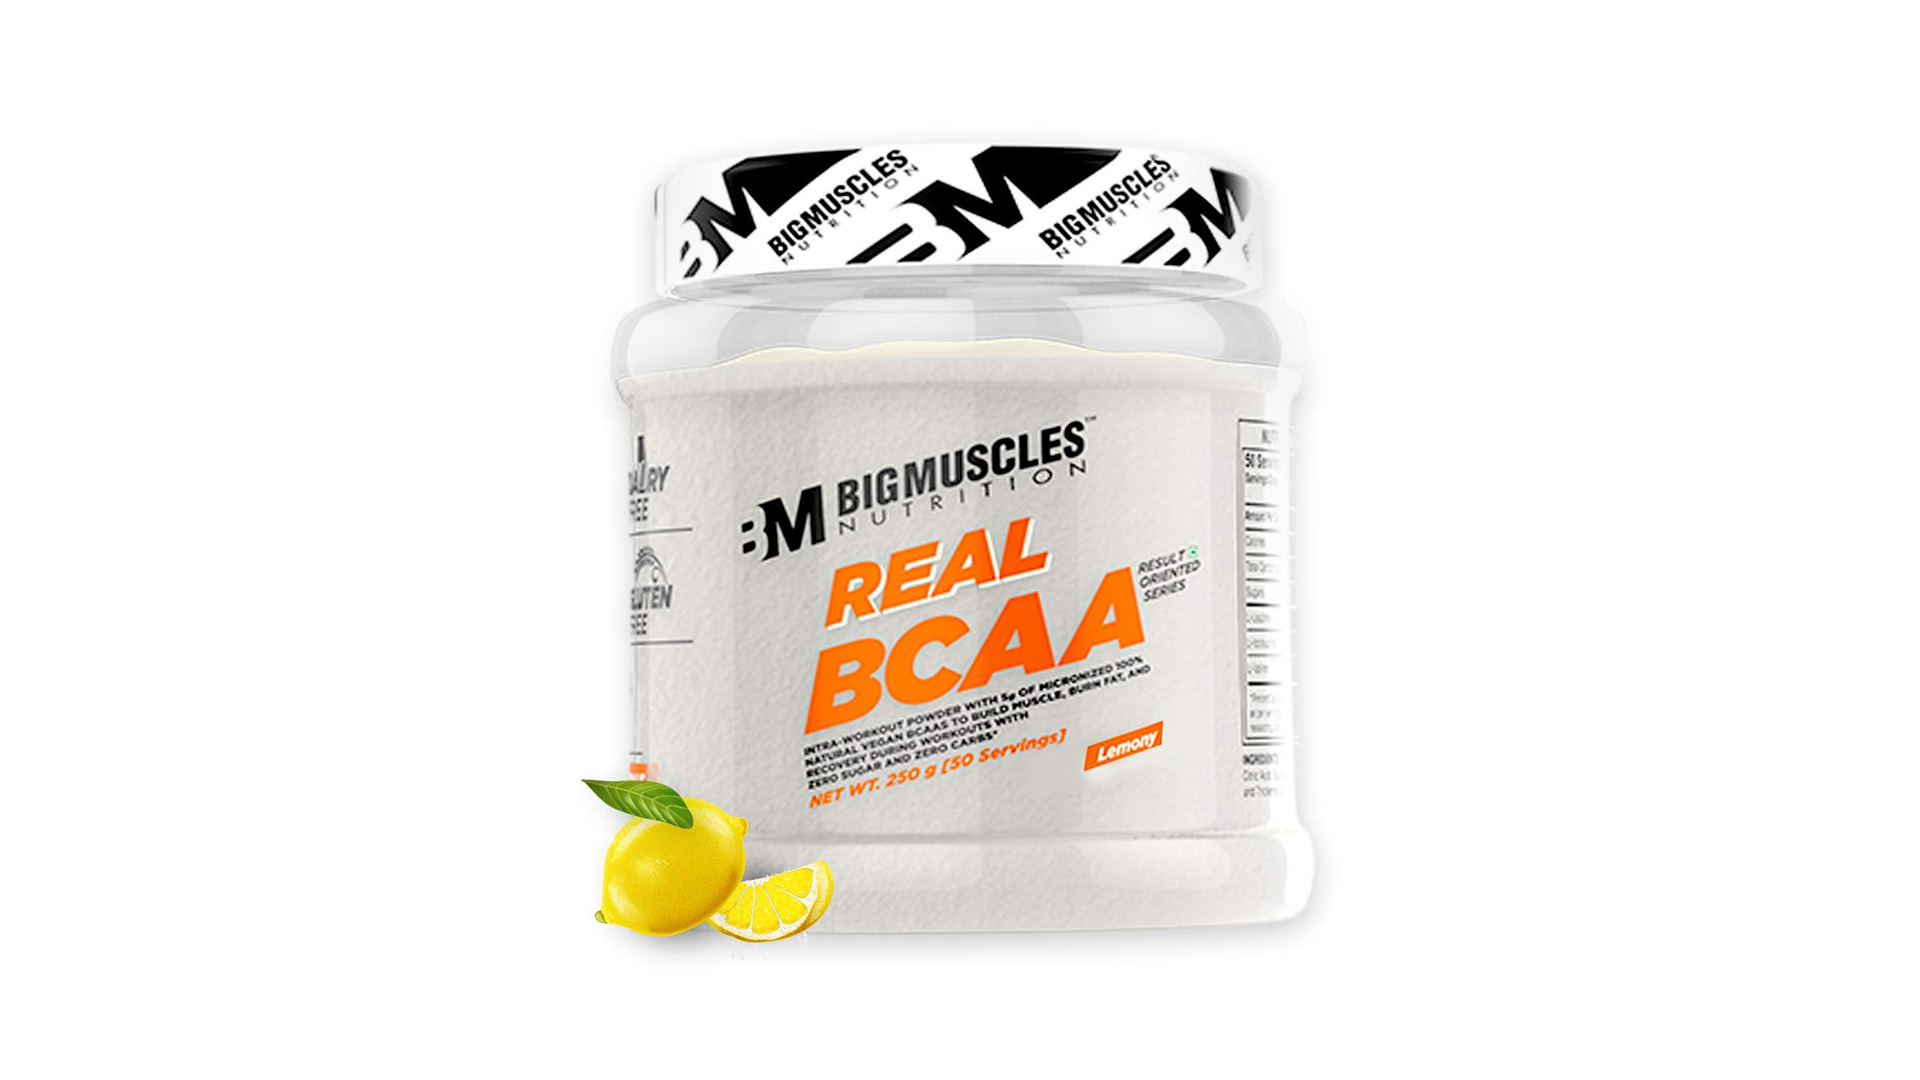 Bigmuscles Nutrition Real BCAA